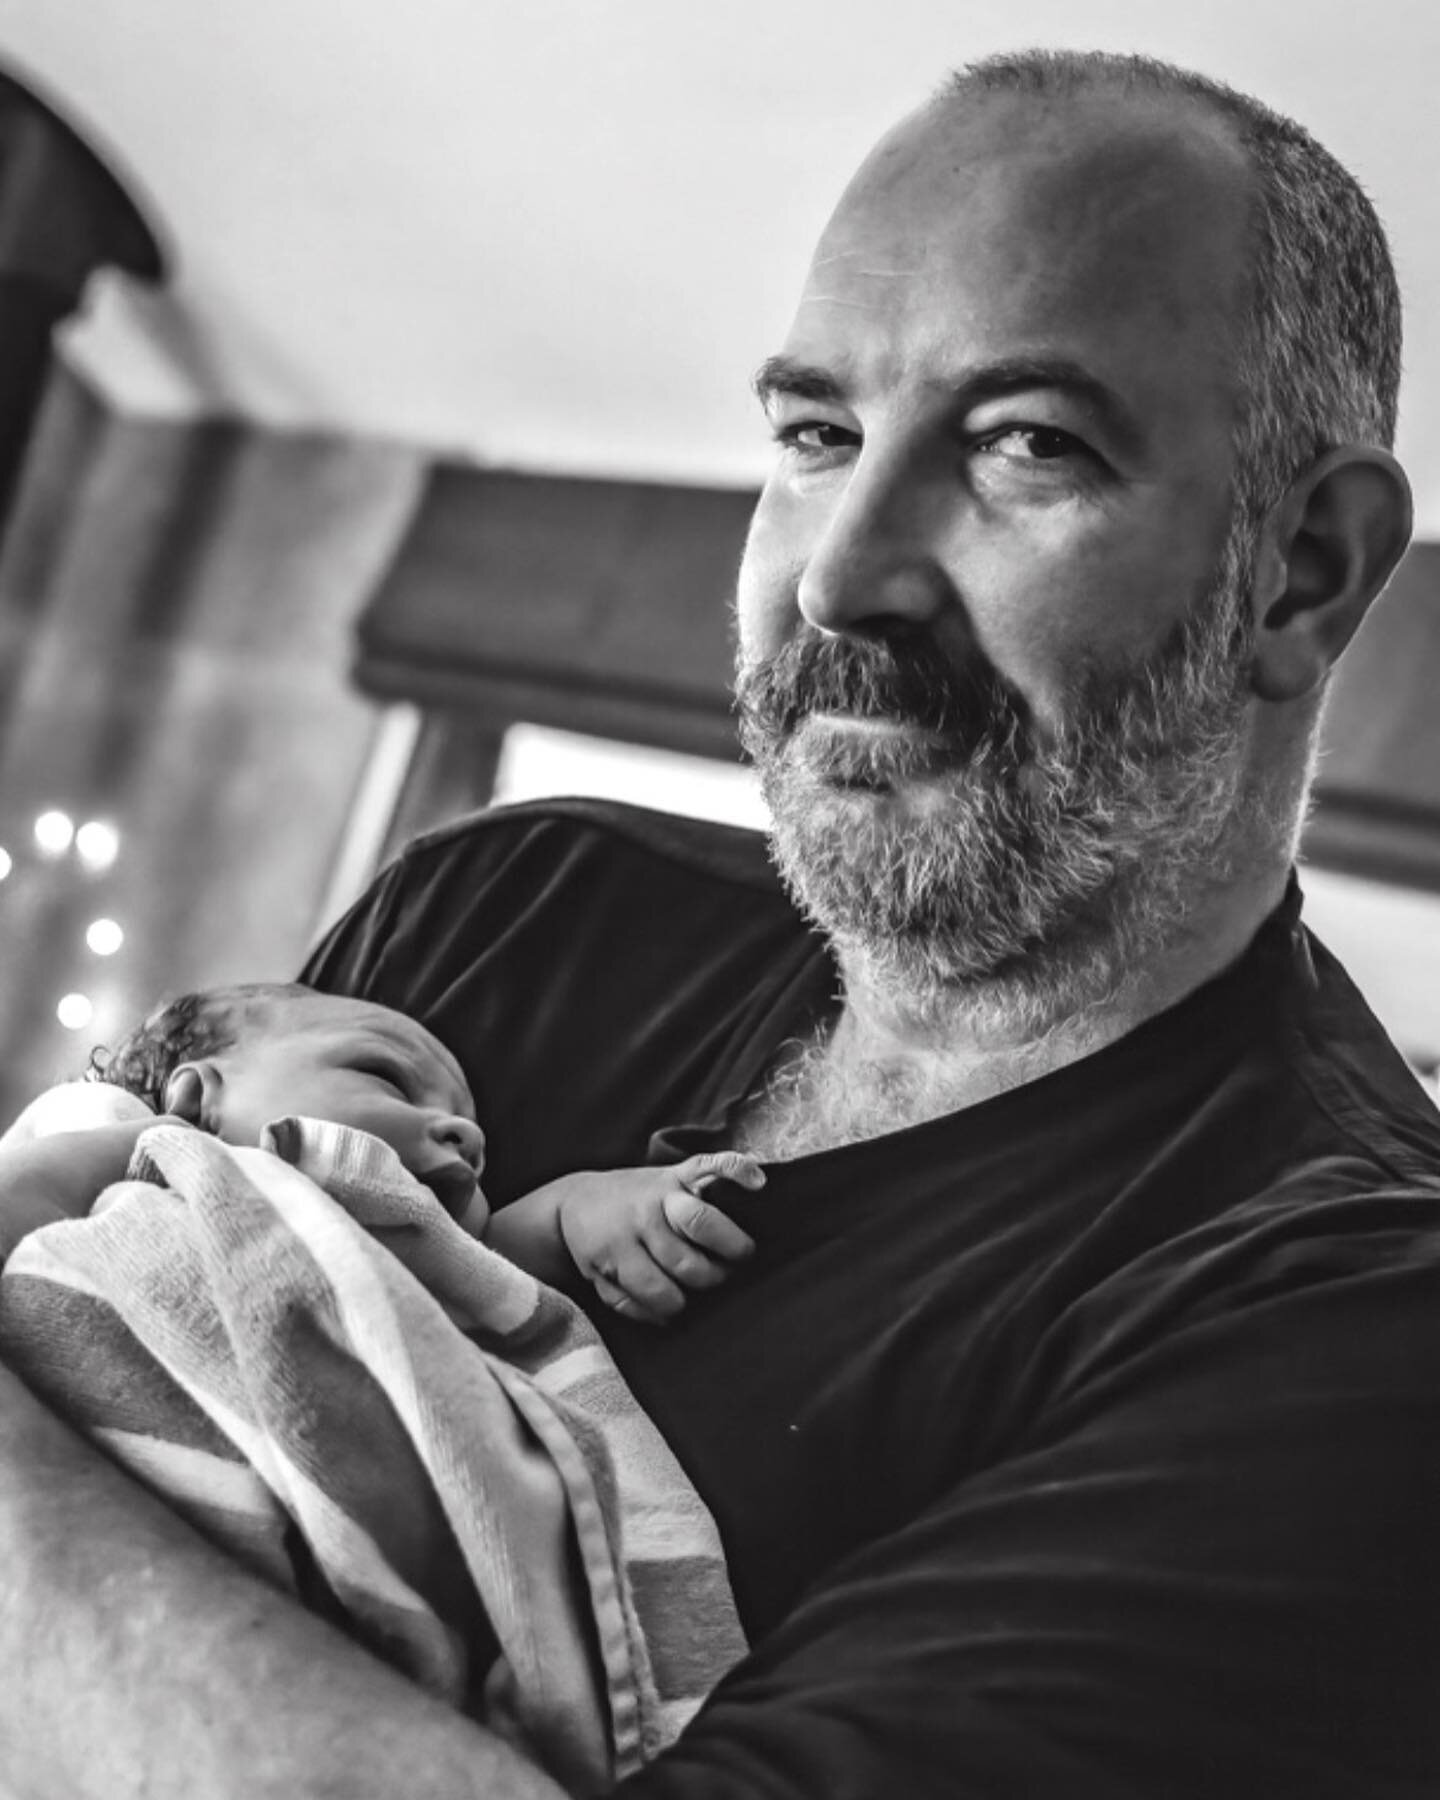 The new proud father look! Or, the &ldquo;My partner just gave birth to our baby boy at home, she is soo amazing, and here is our baby boy,&rdquo; look! Love it! Fatherhood is sacred too! 

Capturing moments like this after birth is priceless! 
.
.
.